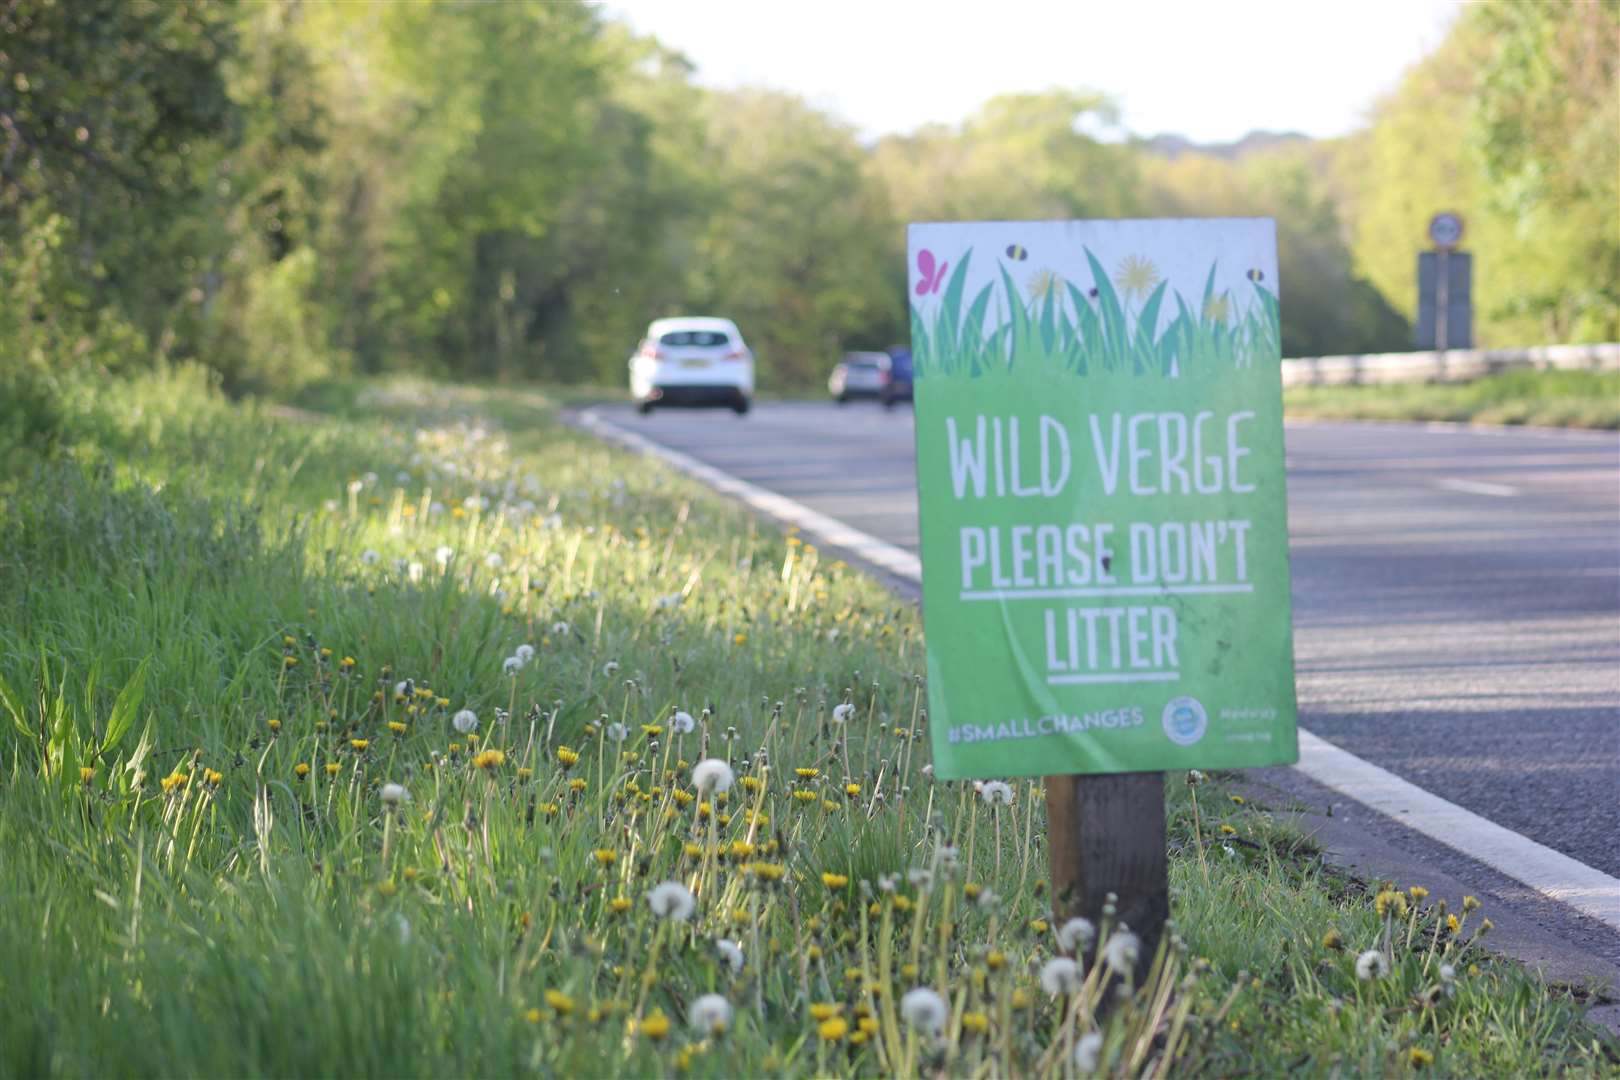 Medway Council introduced it own wild verge programme last year